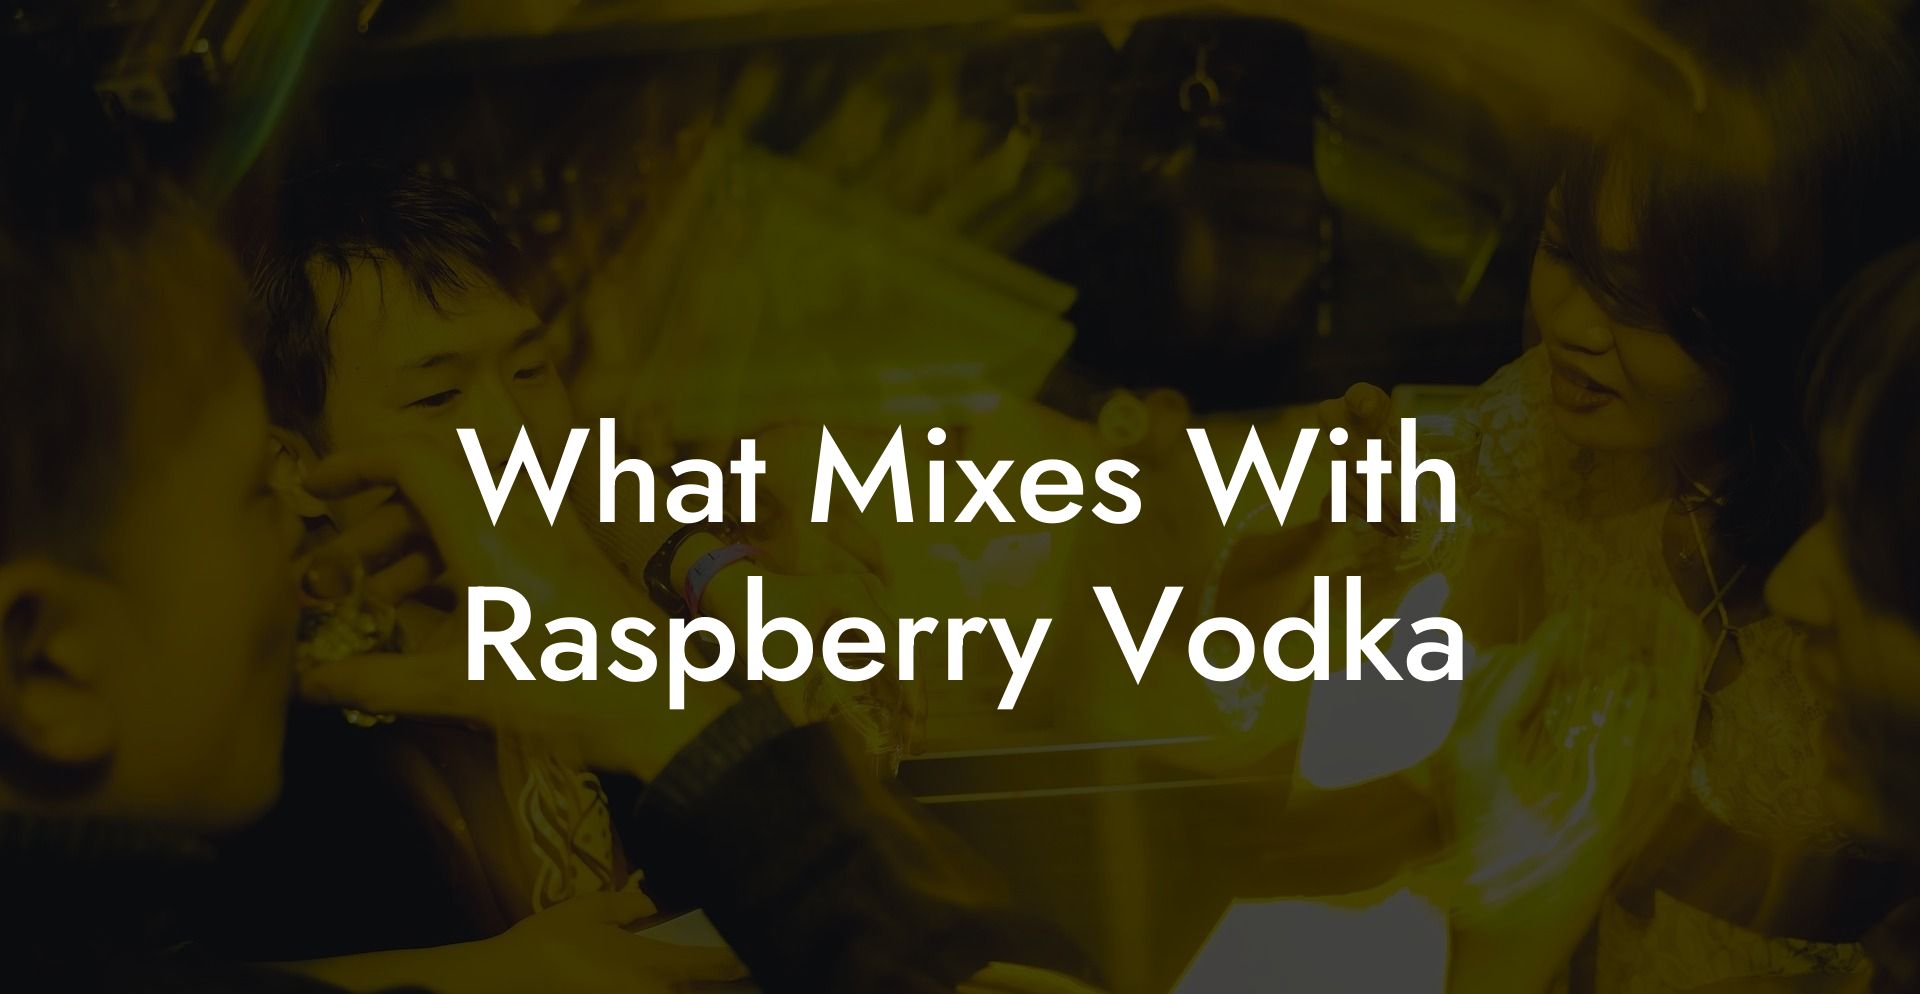 What Mixes With Raspberry Vodka